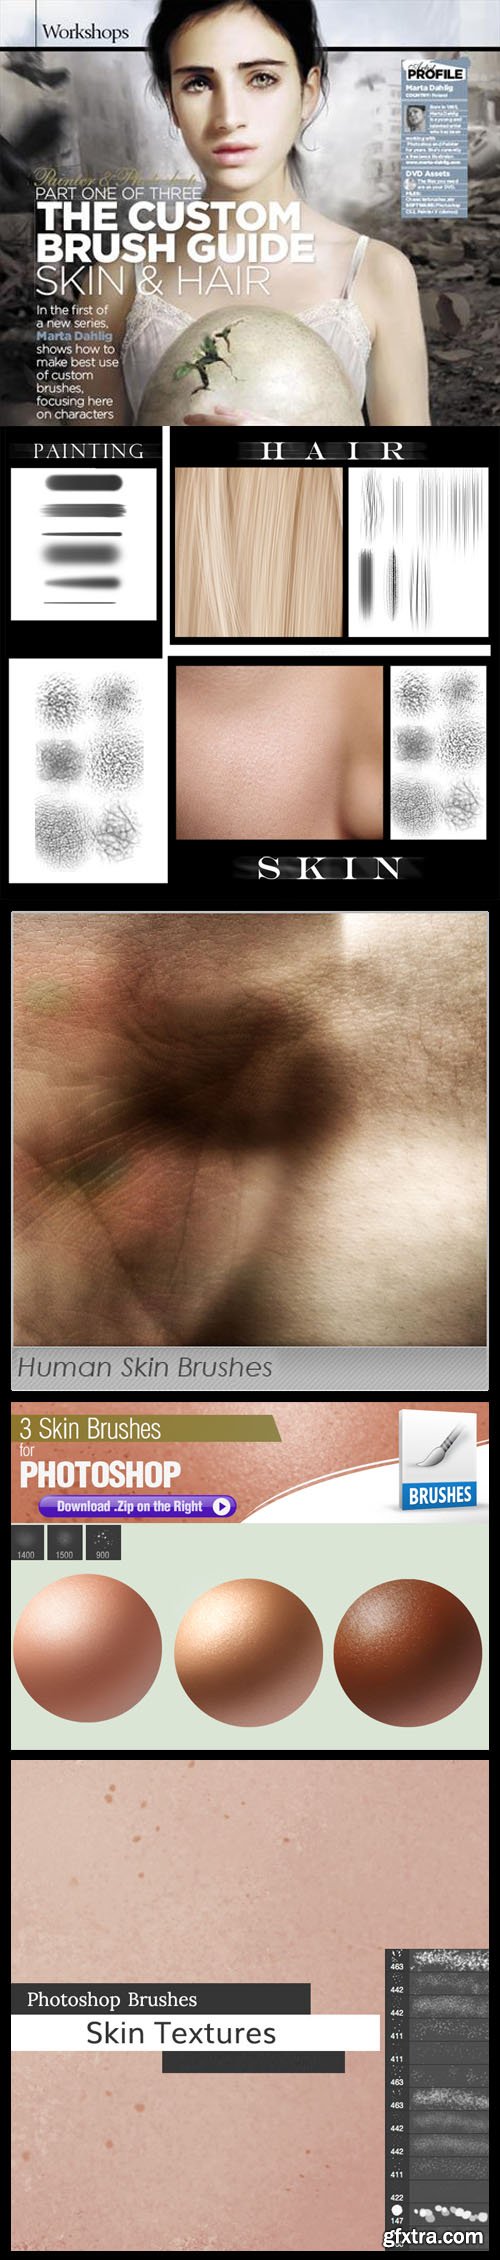 Realistic Human Skin & Hair Brushes Collection for Photoshop